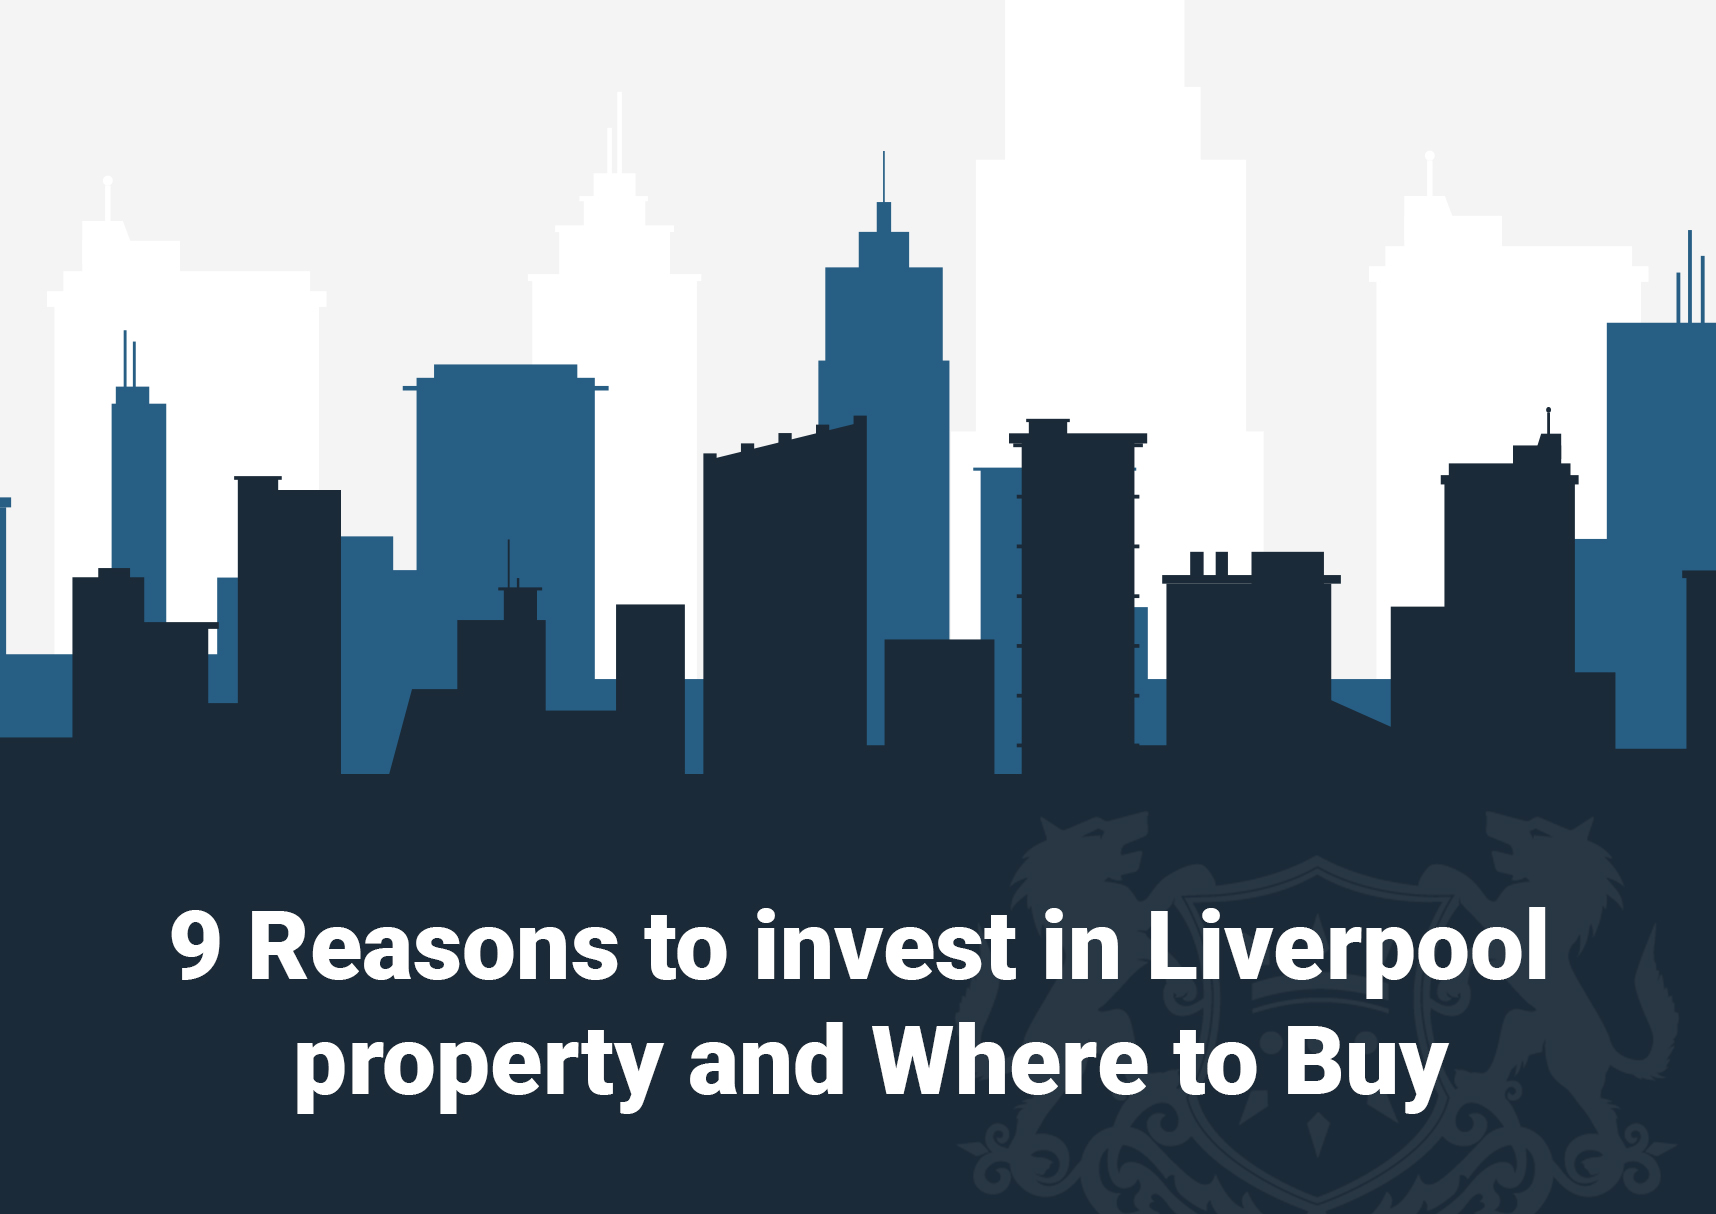 9 Reasons to Invest in Property in Liverpool and Where to Buy